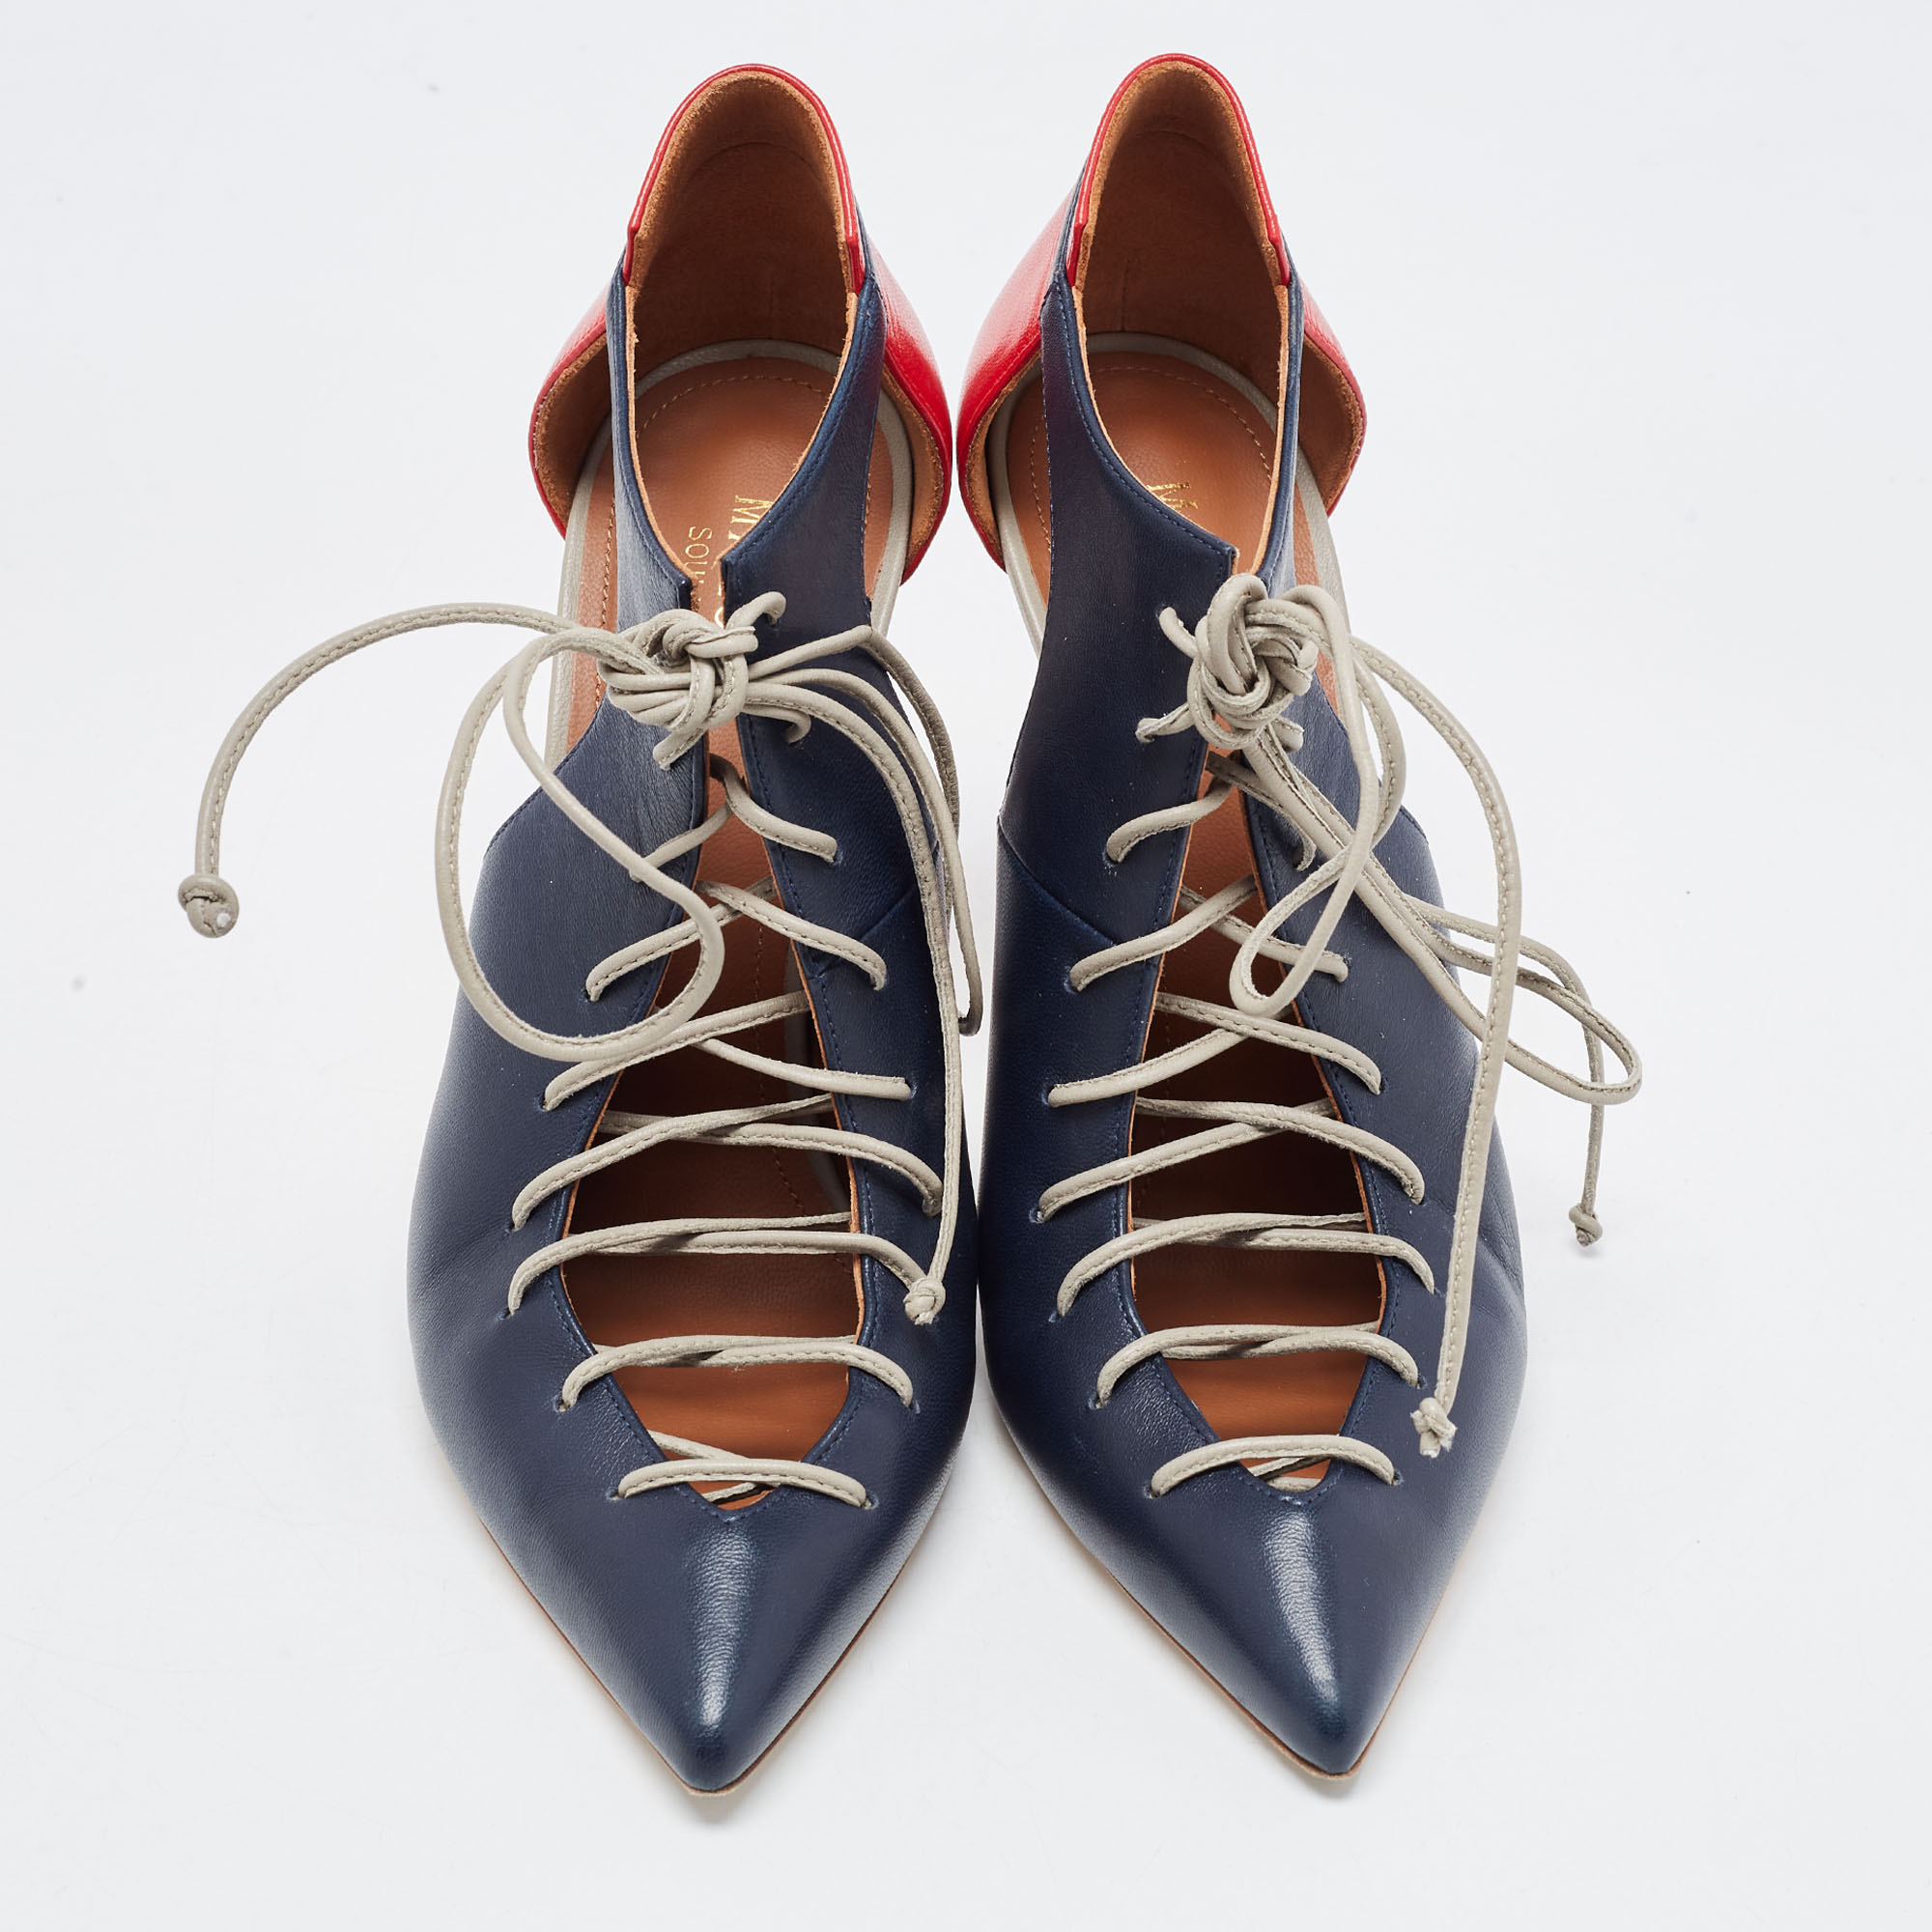 Malone Souliers Navy Blue/Red Leather Montana Lace Up Pumps Size 38